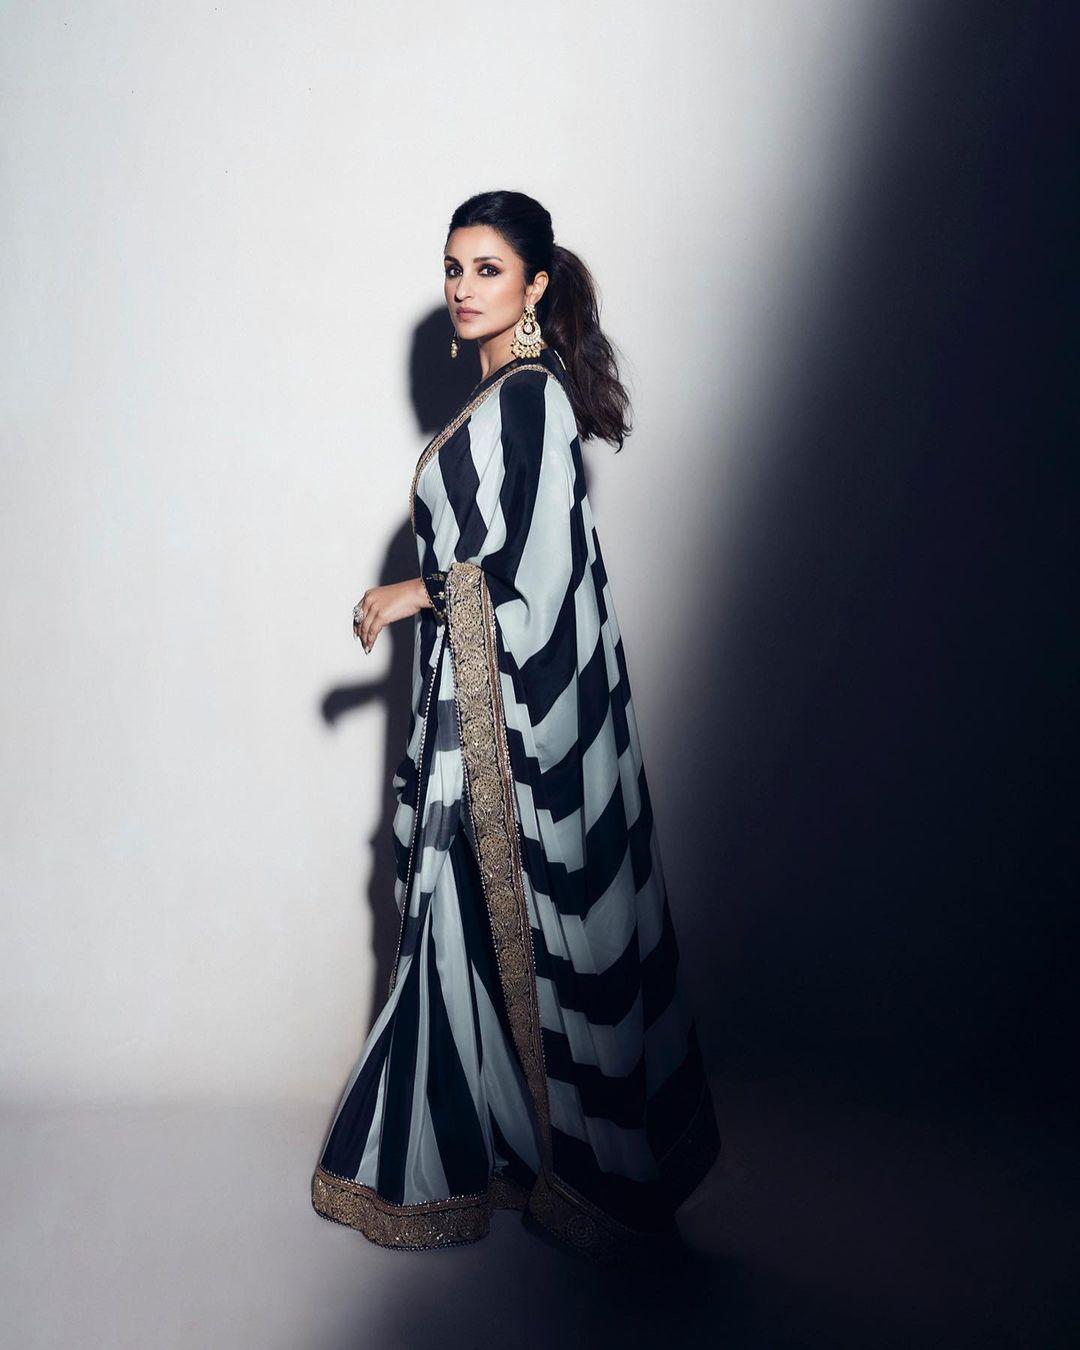 This black and white saree with a heavy border can make you effortlessly stand out in the crowd. Its simple print maintains a sense of sophistication, while the addition of heavy jhumkas infuses a touch of glamour to complete the look